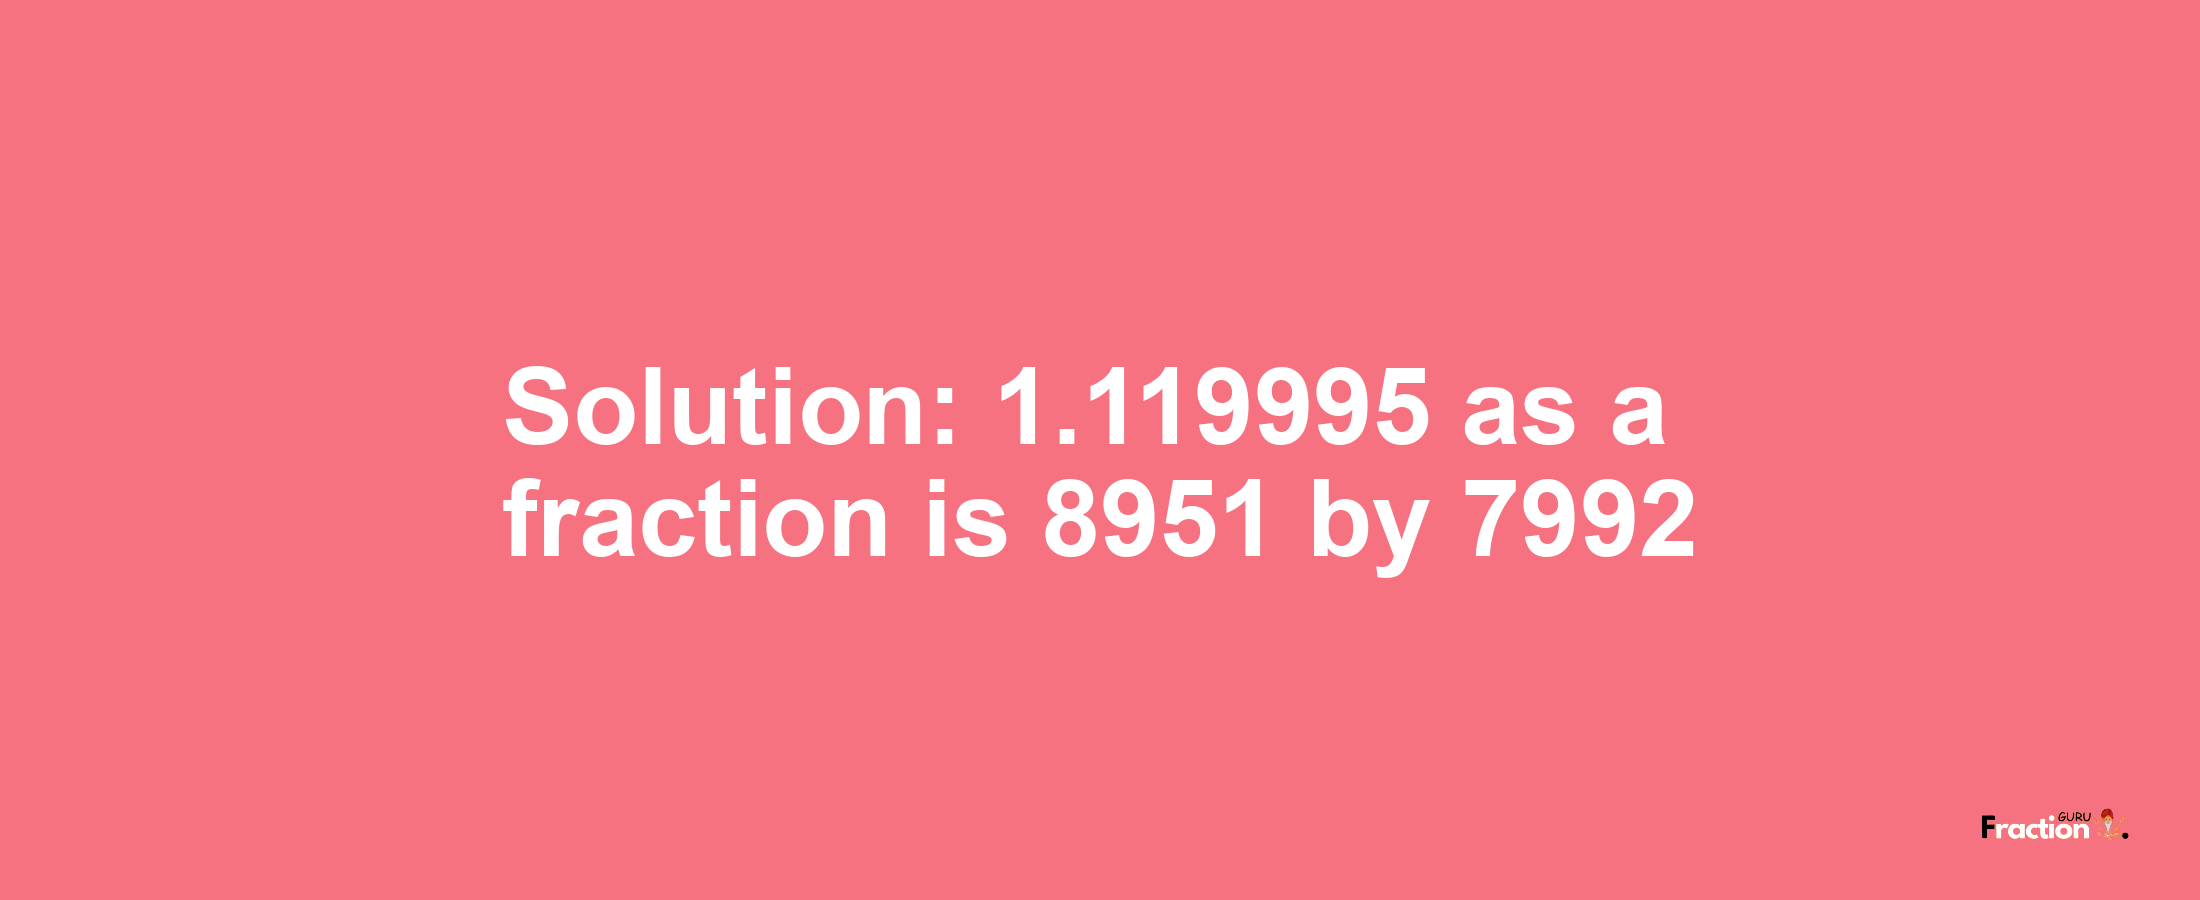 Solution:1.119995 as a fraction is 8951/7992